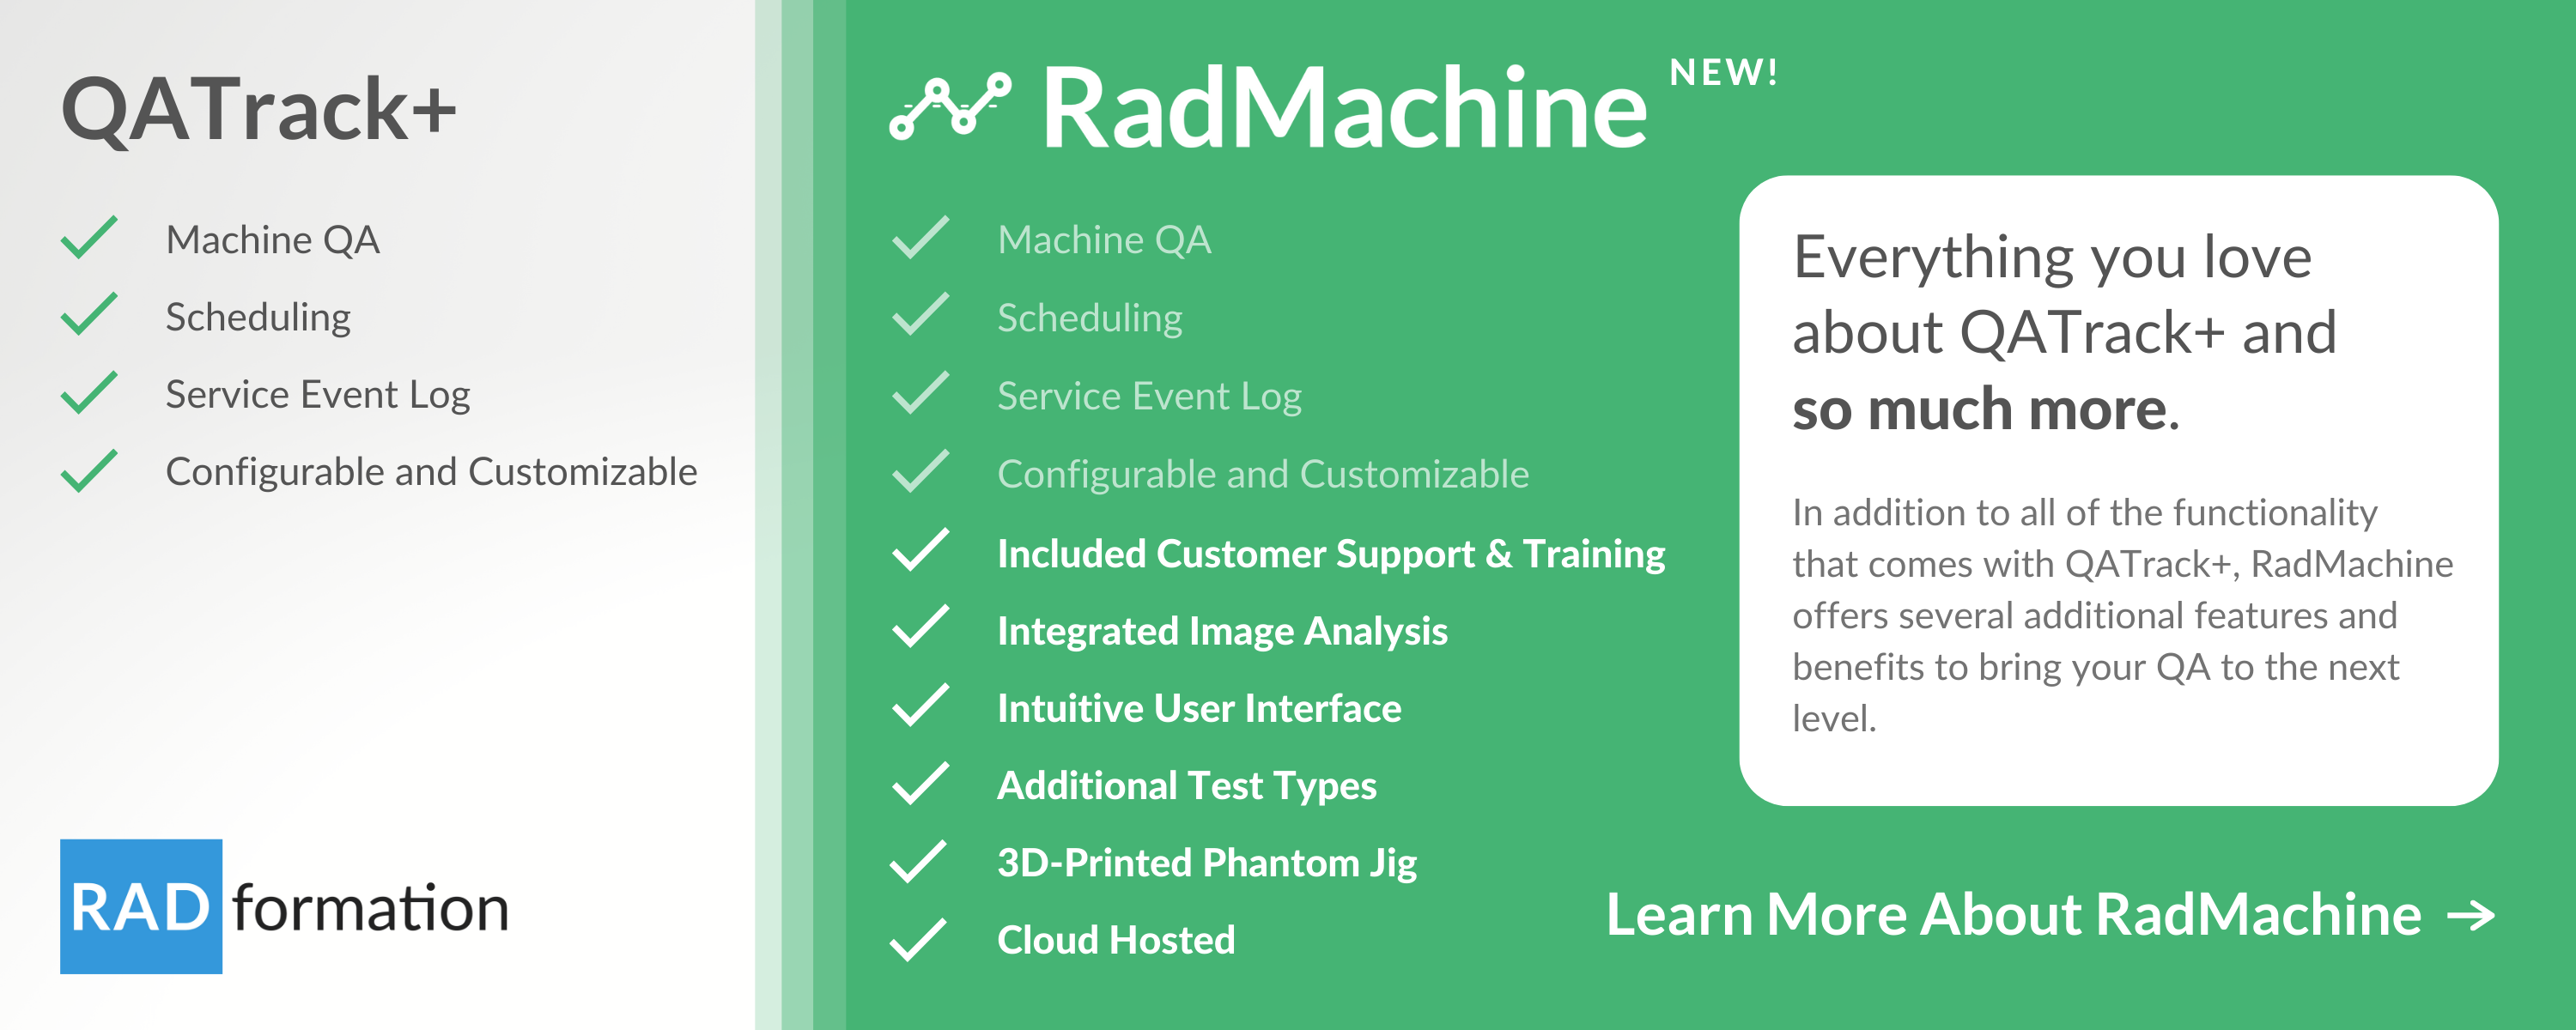 RadMachine by RadFormation is a fully supported, cloud hosted version of QATrack+ with additional features